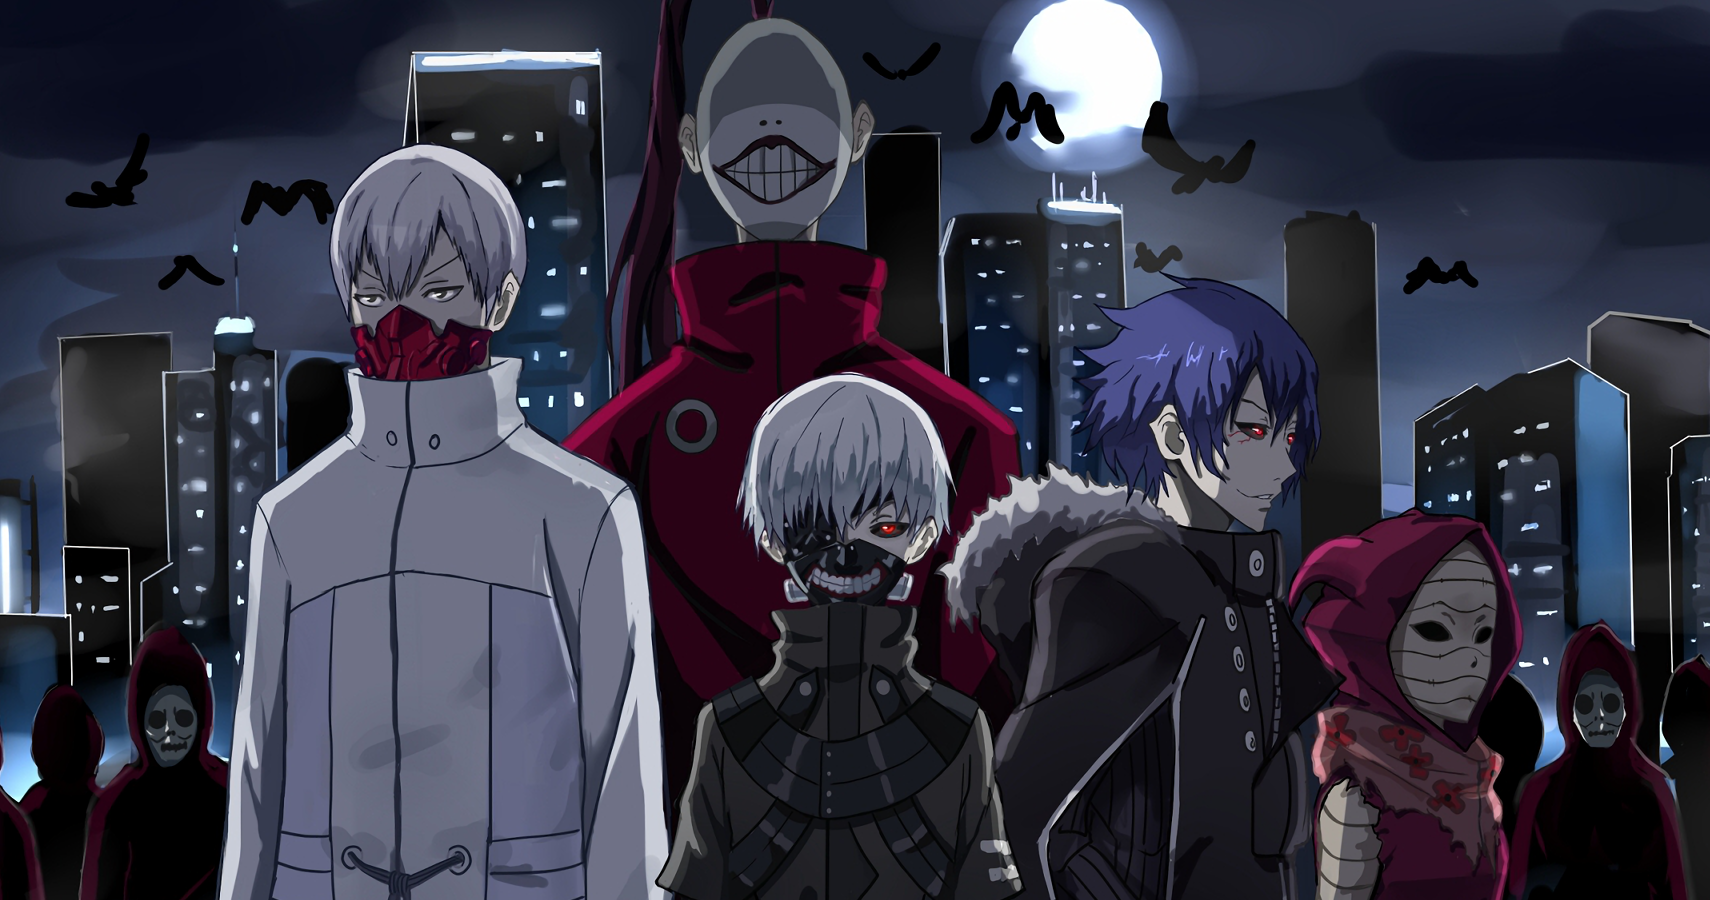 Why is Tokyo Ghoul considered a bad anime? - Quora